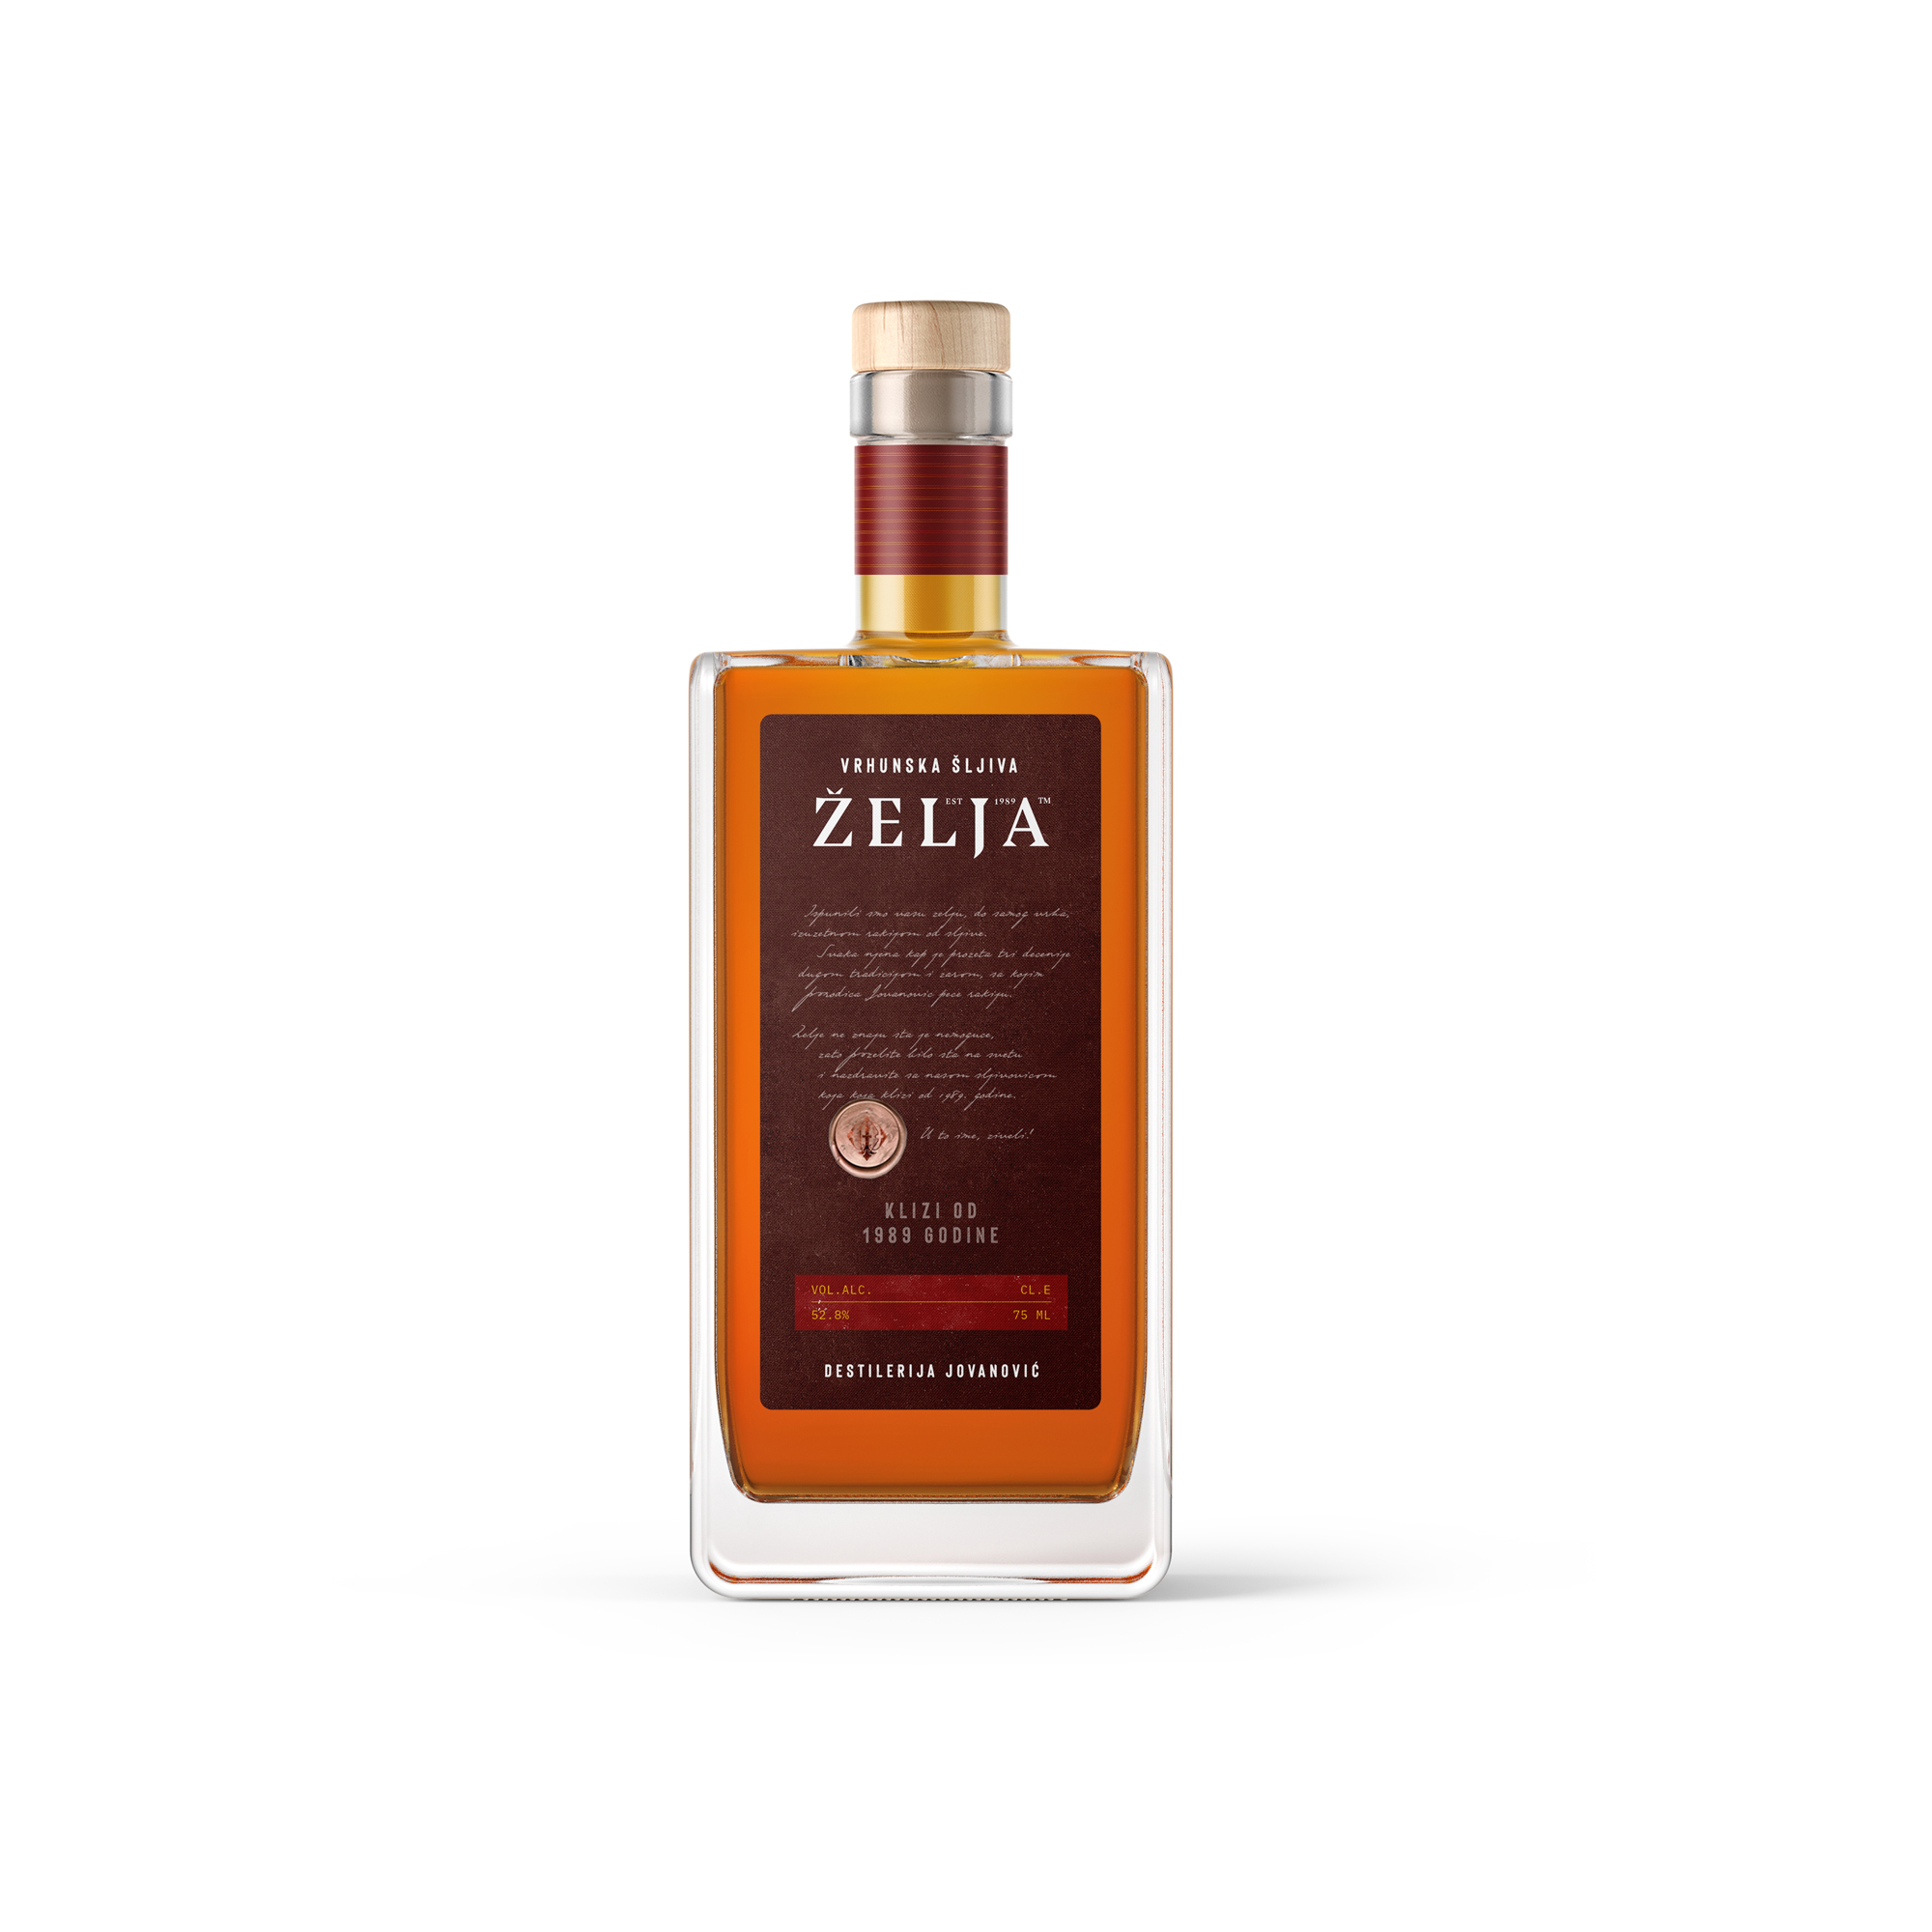 Identity and Packaging Design for New Brandy Zelja by IMVD